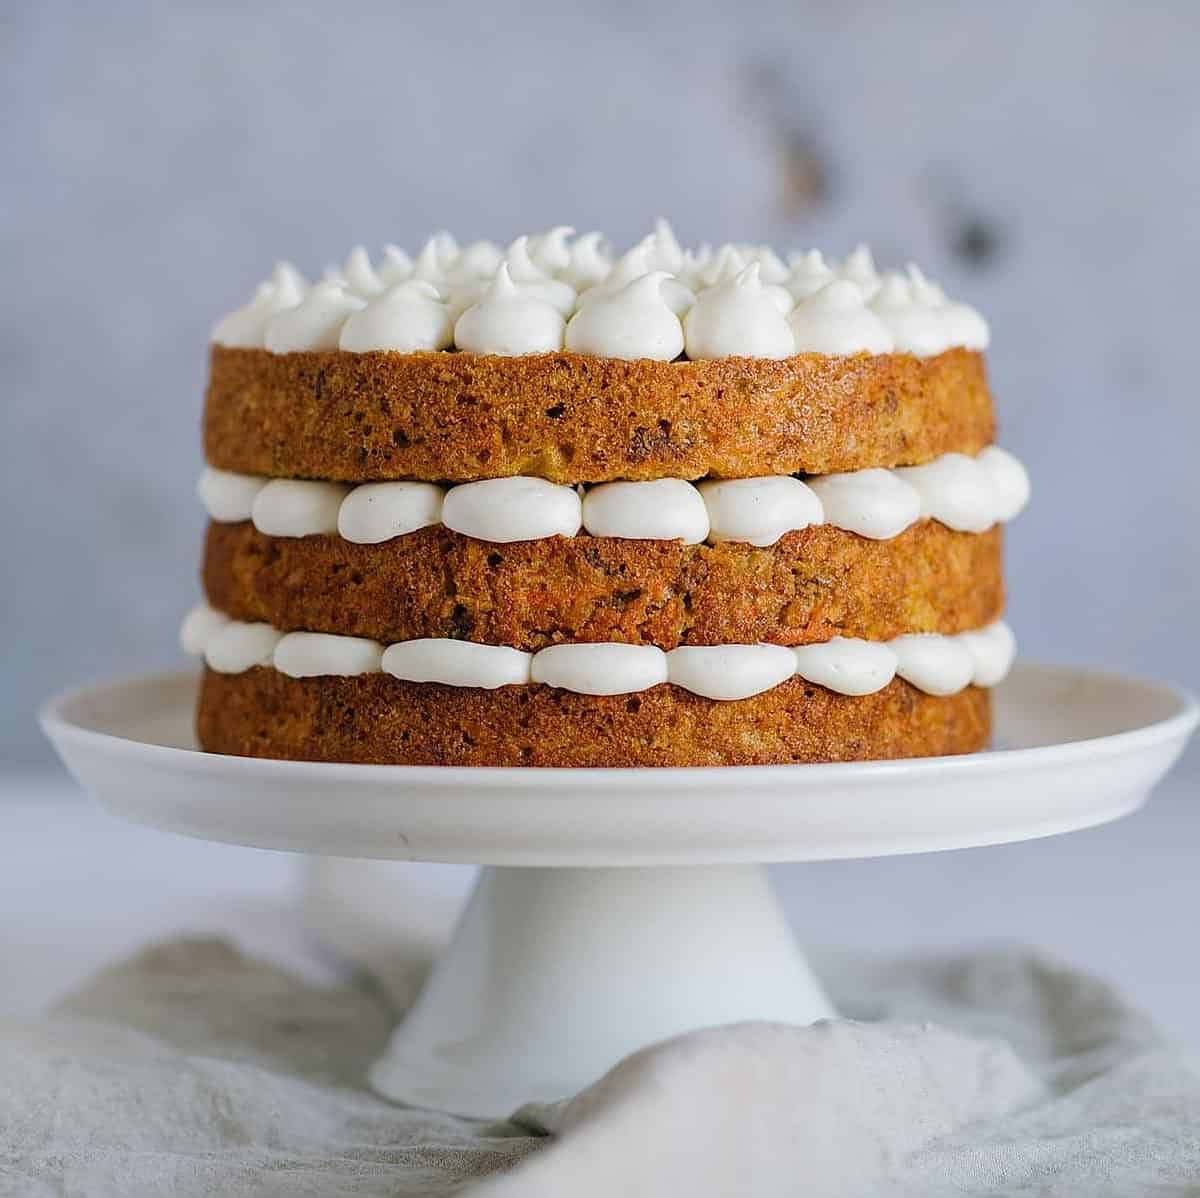  This cake is made with love, patience, and a secret ingredient that will surprise you.